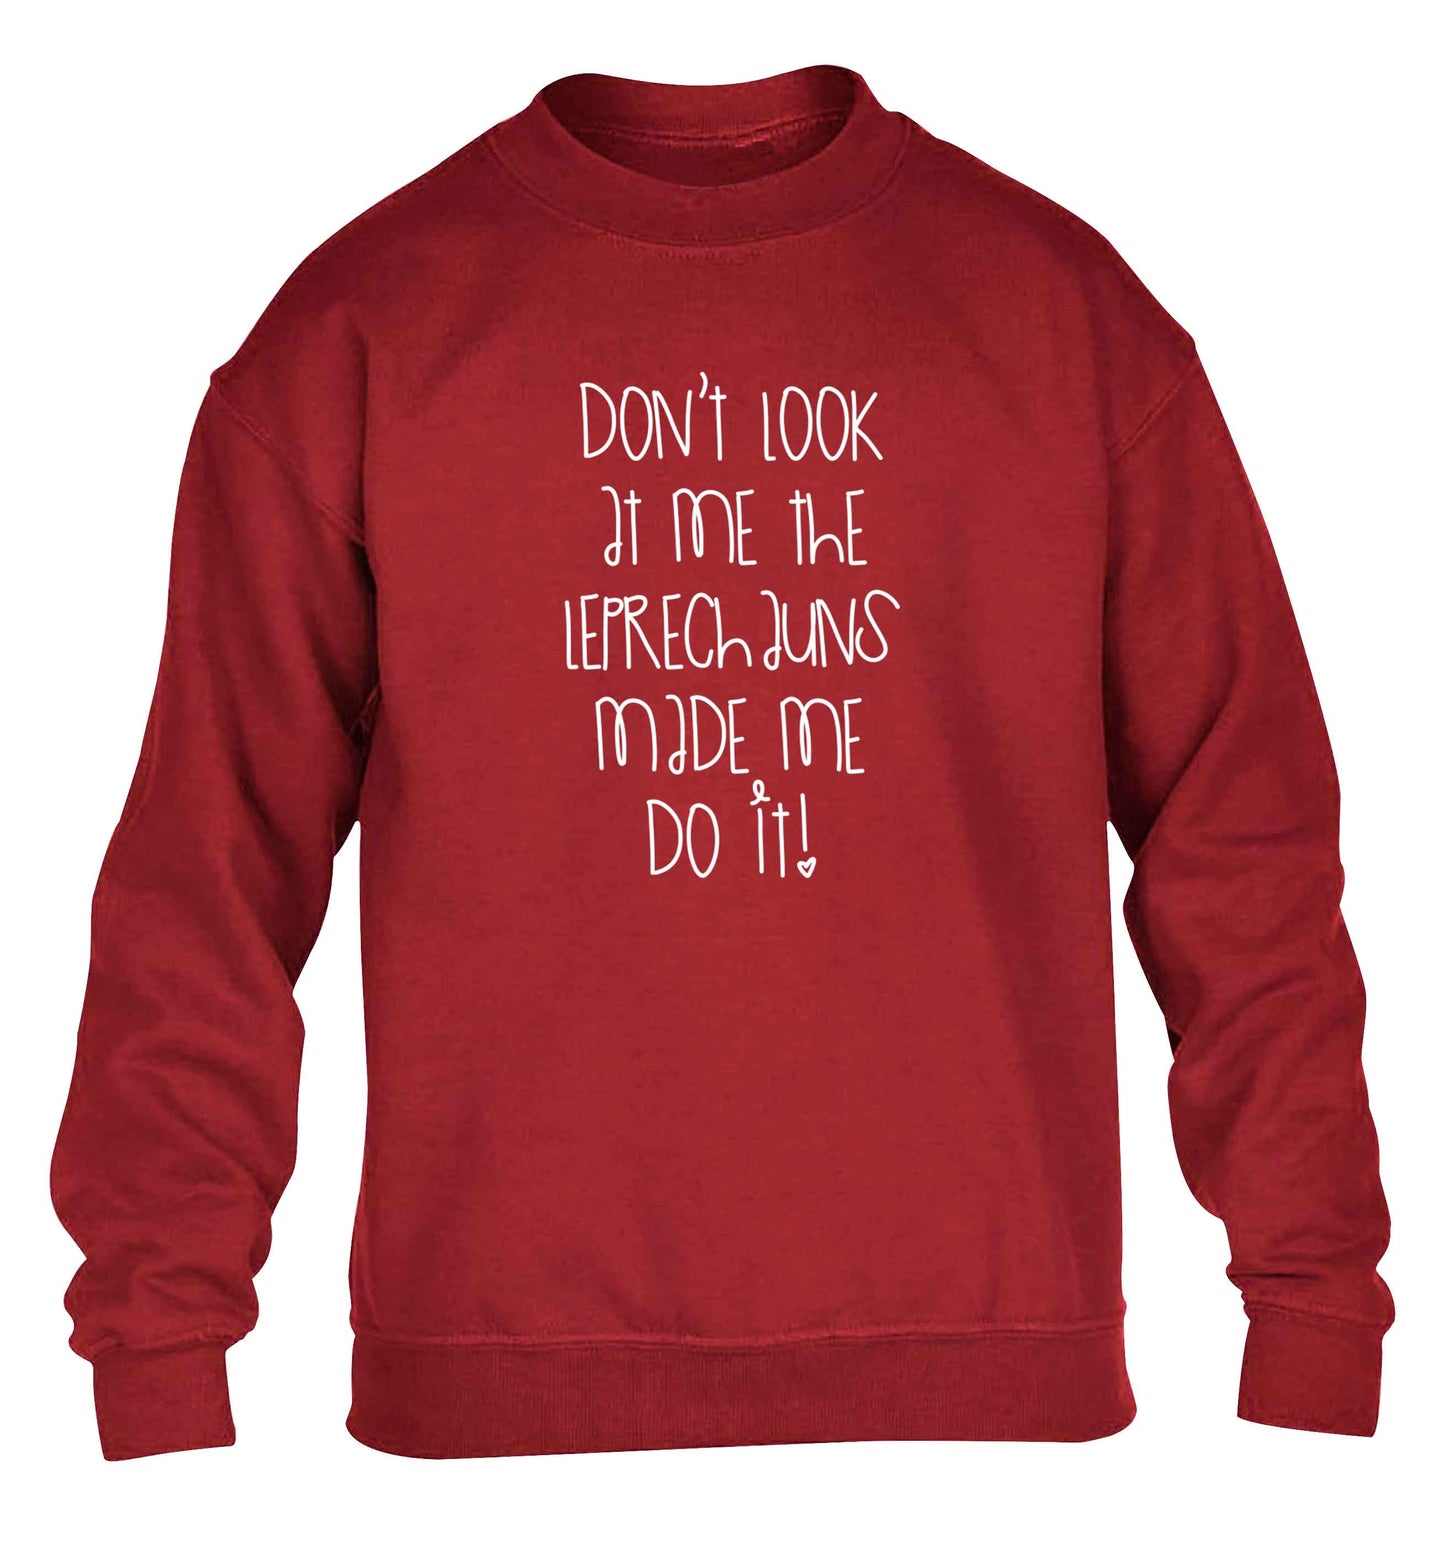 Don't look at me the leprechauns made me do it children's grey sweater 12-13 Years